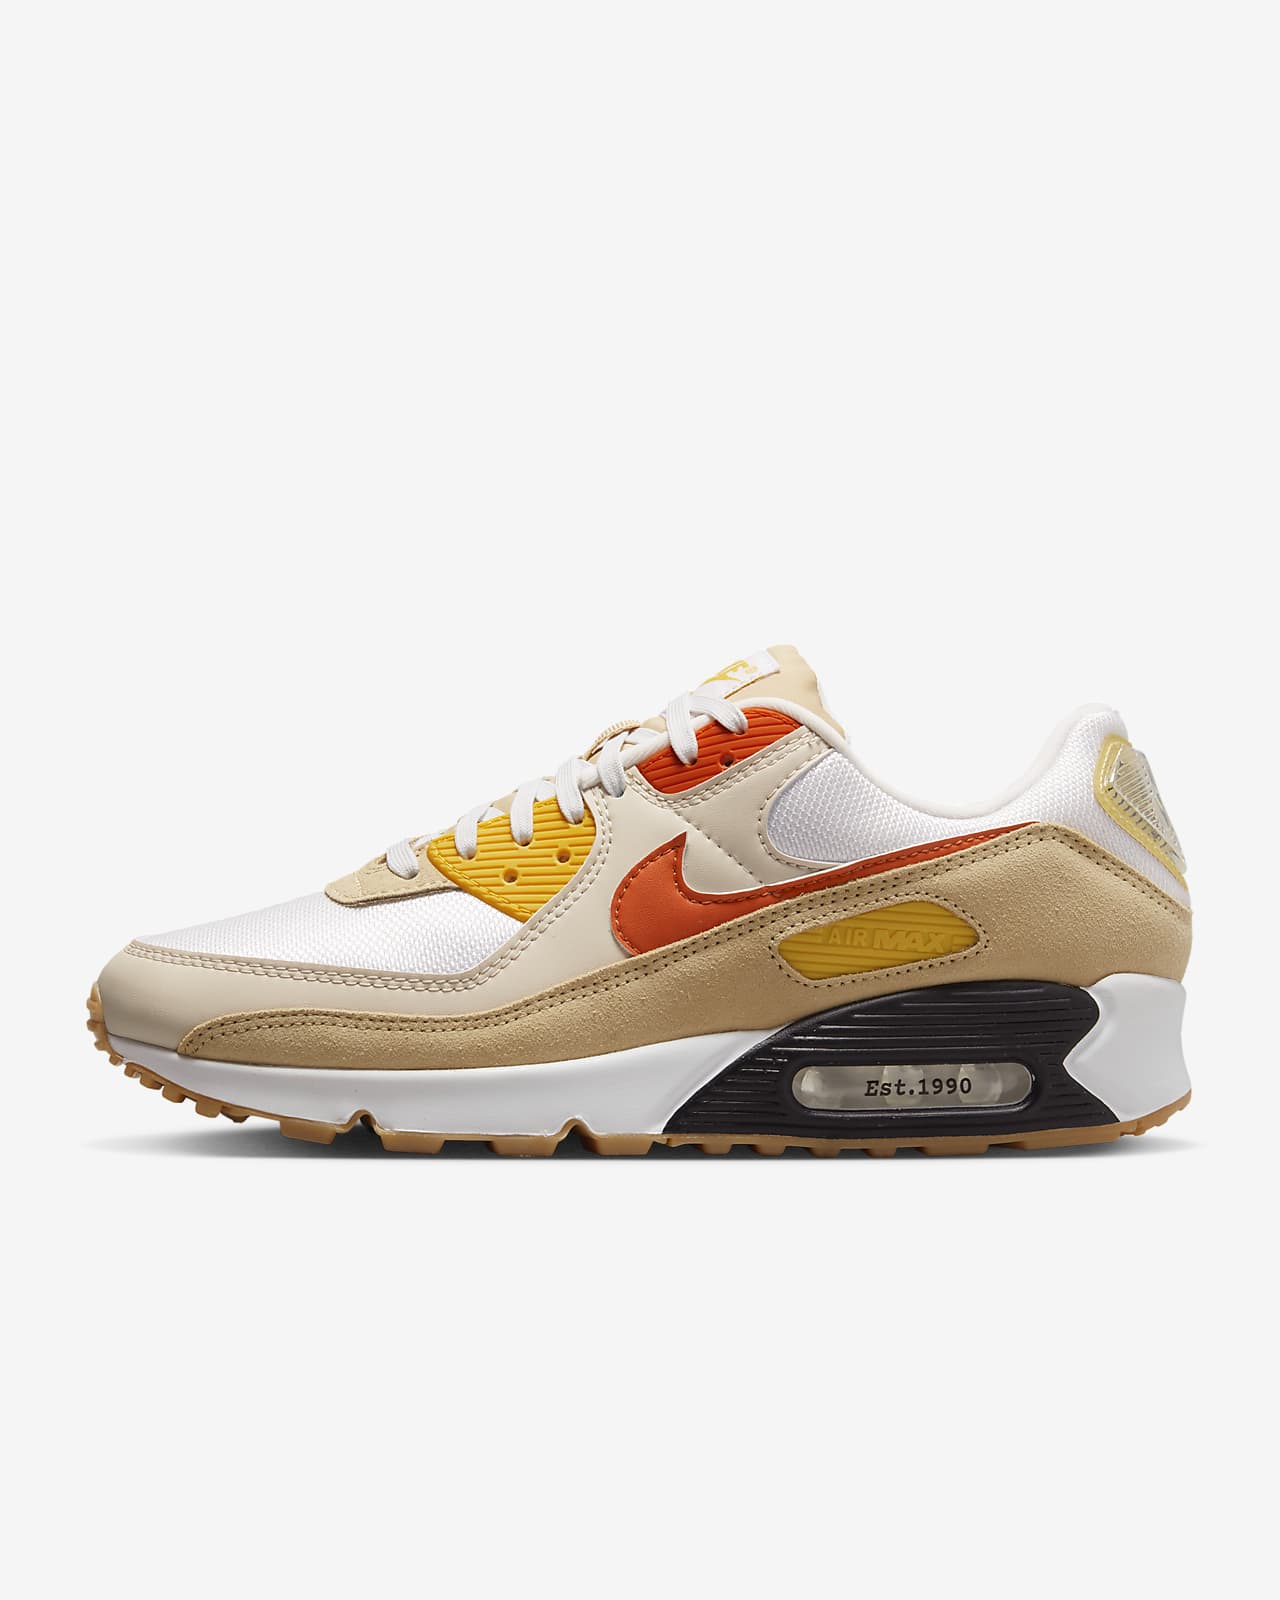 Bot holte zaad Nike Air Max 90 SE Herenschoen. Nike BE